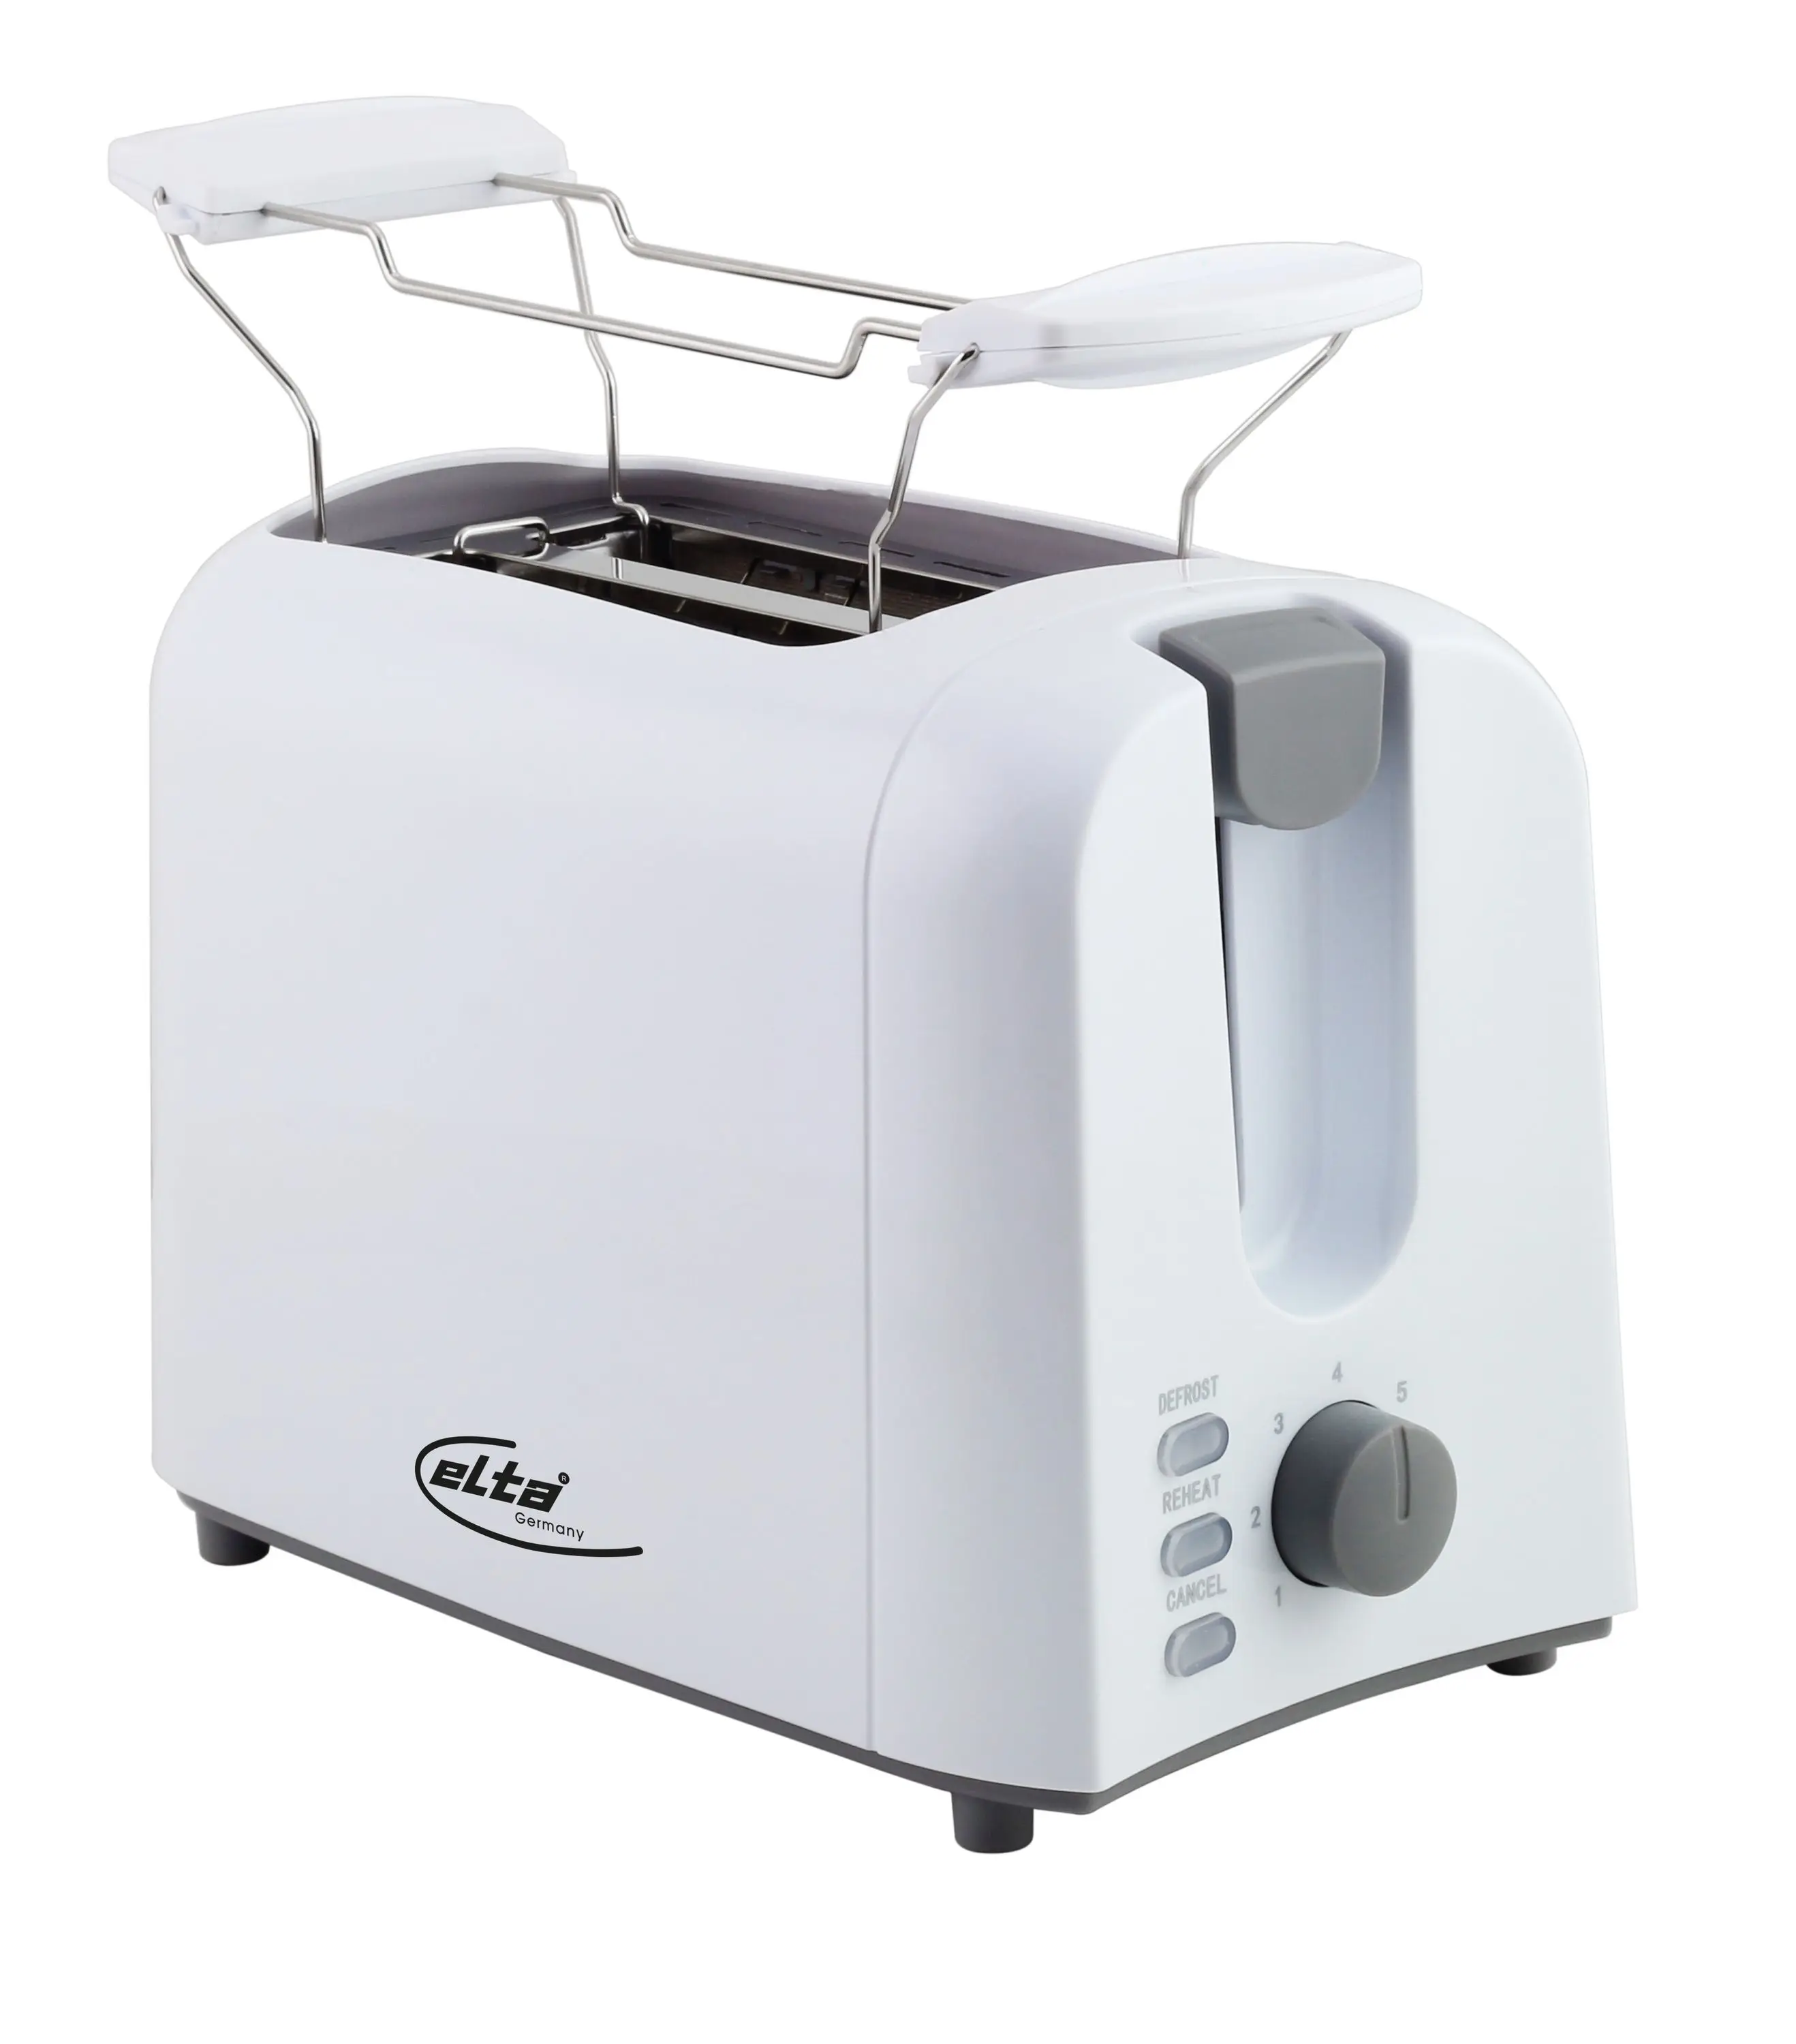 Touch Toaster Cool 2001563